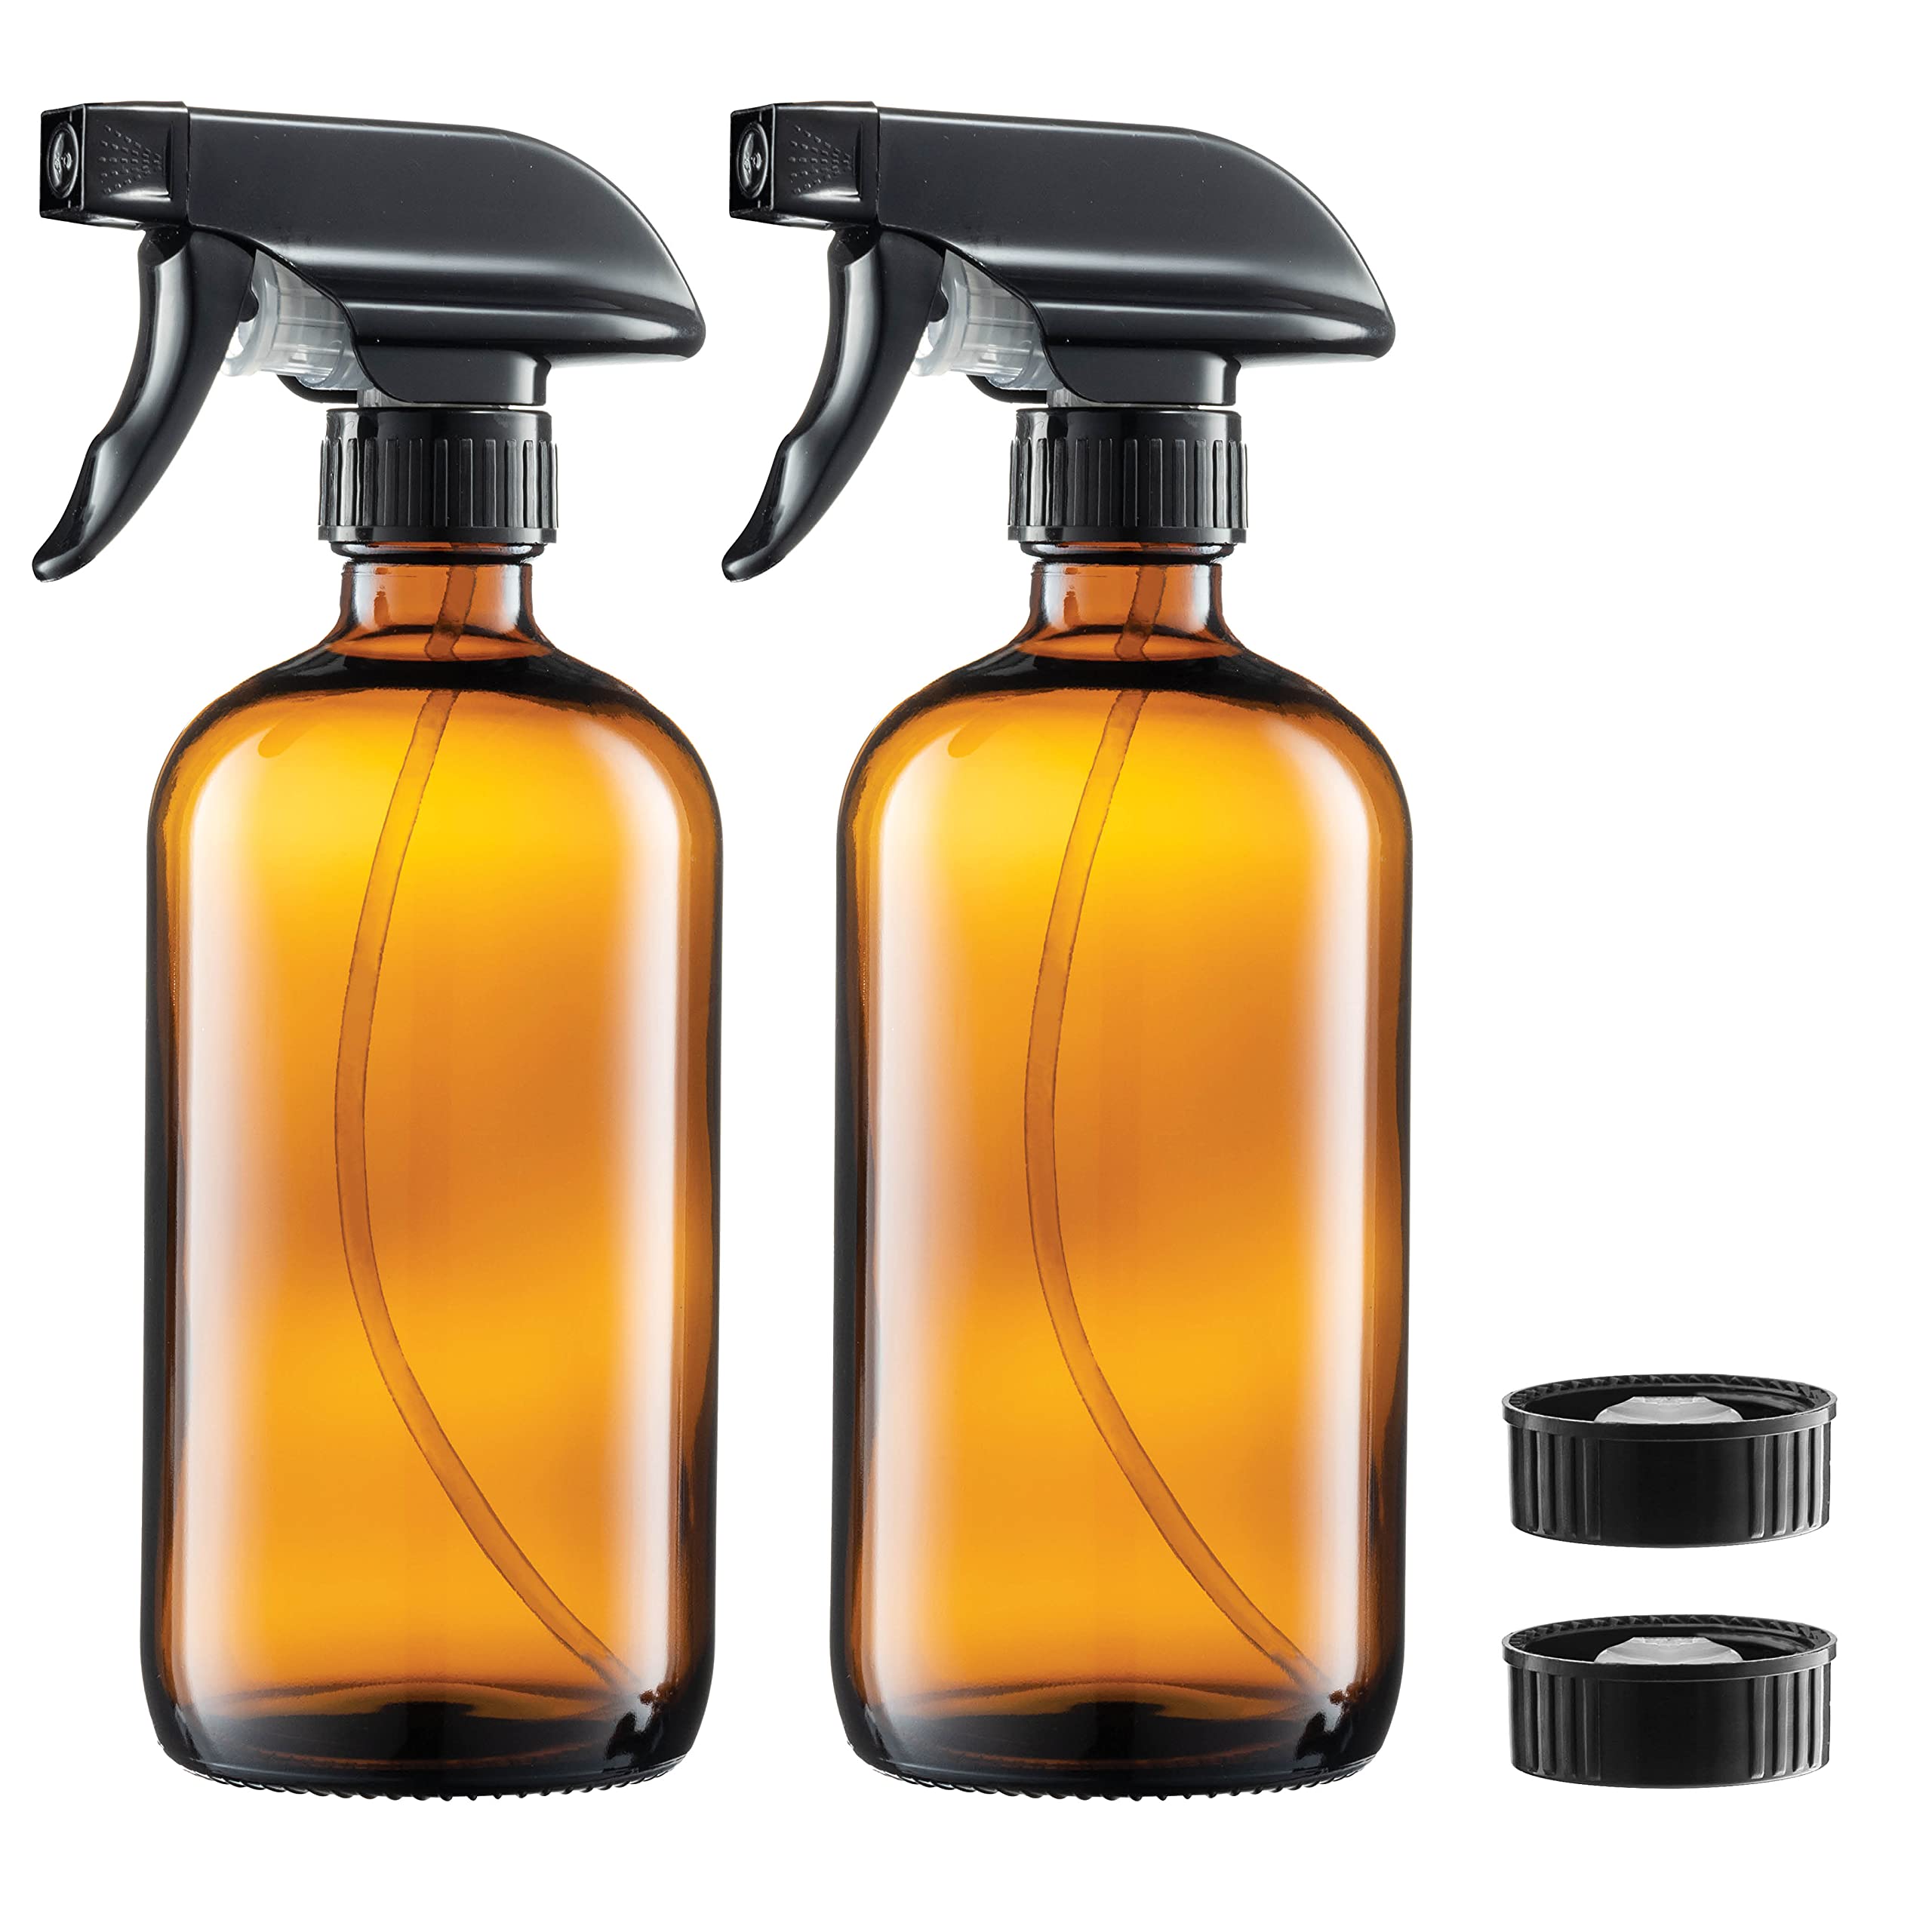 Glass Spray Bottles Amber - 2 Pack 16 Oz Refillable Glass Sprayer Container with Durable Leakproof Trigger Sprayer with Mist/Stream/Lock for Hair, Cleaning Products, Essential Oils, Aromatherapy, Water